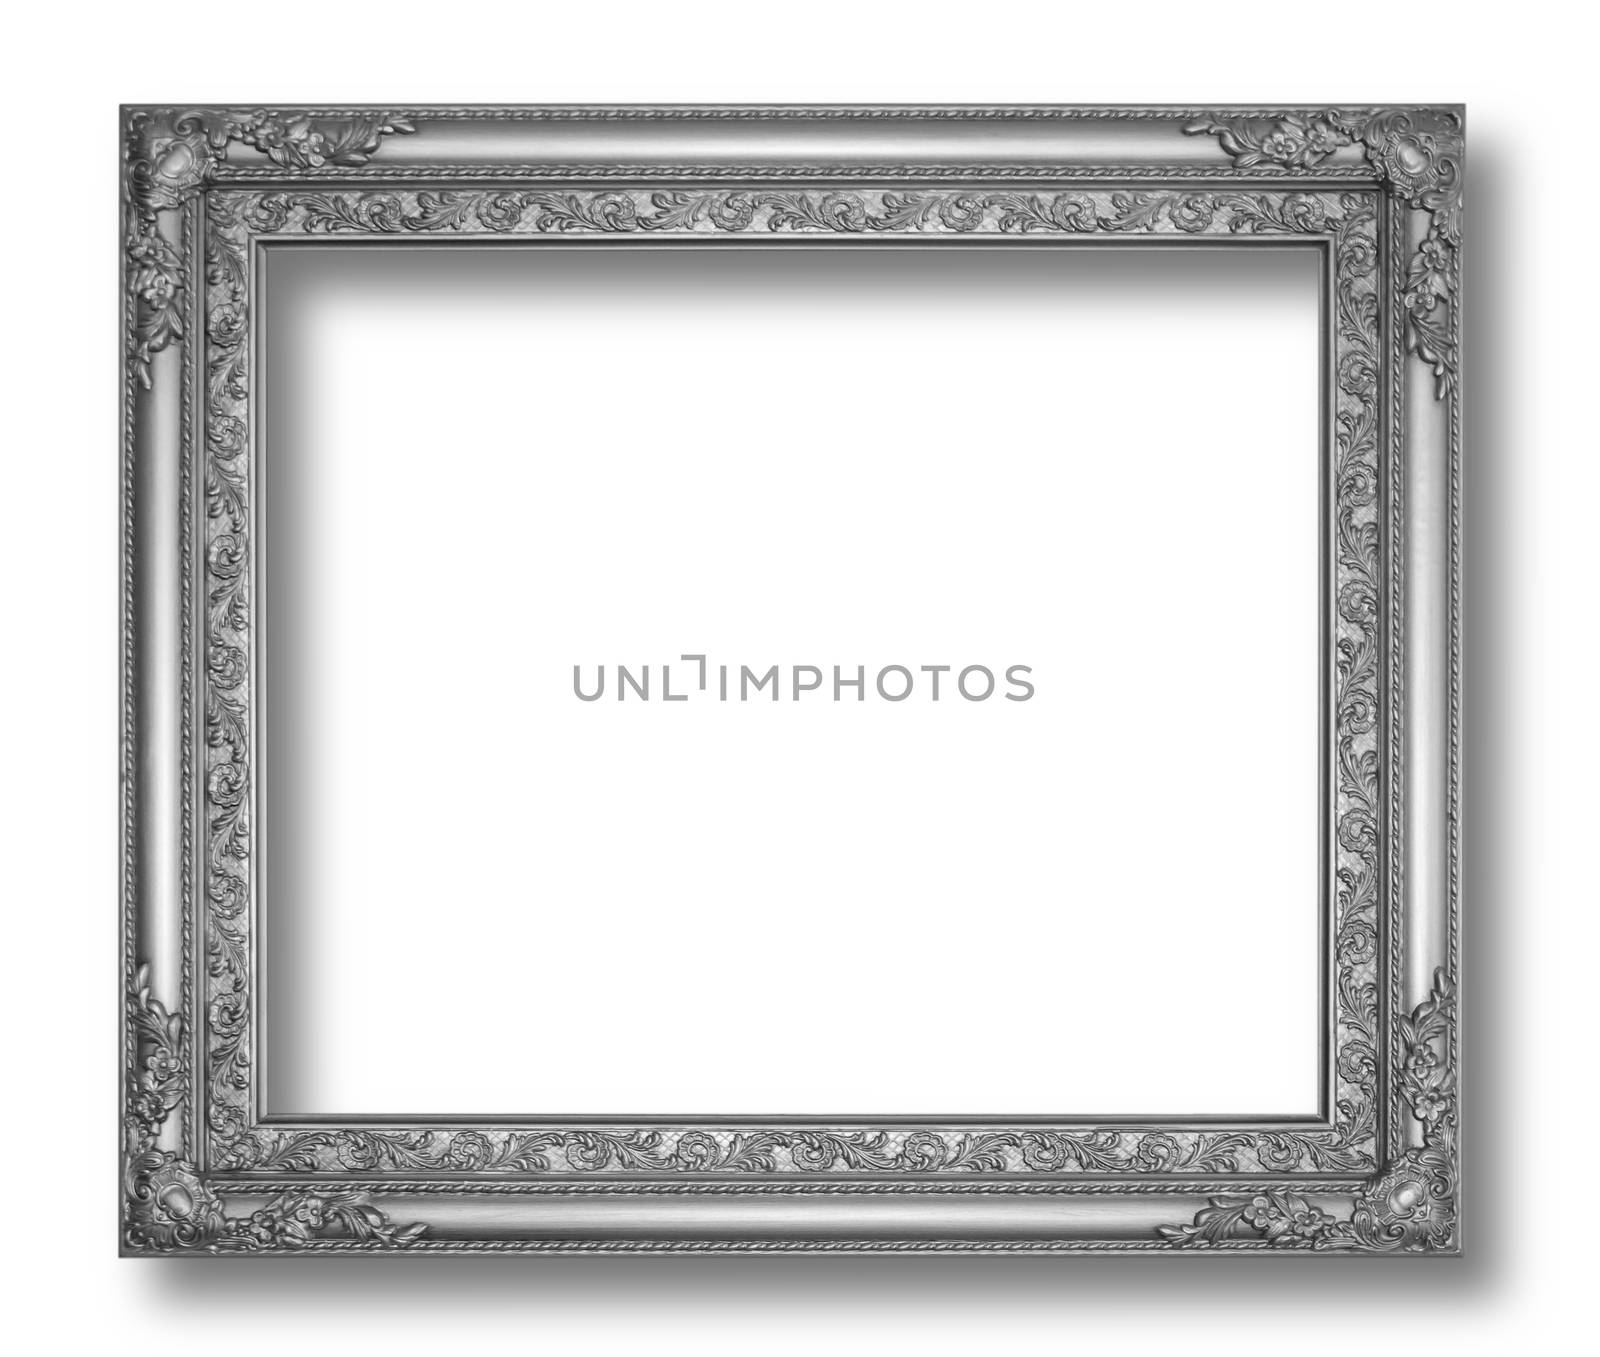 Ancient wooden frame isolated on white background.